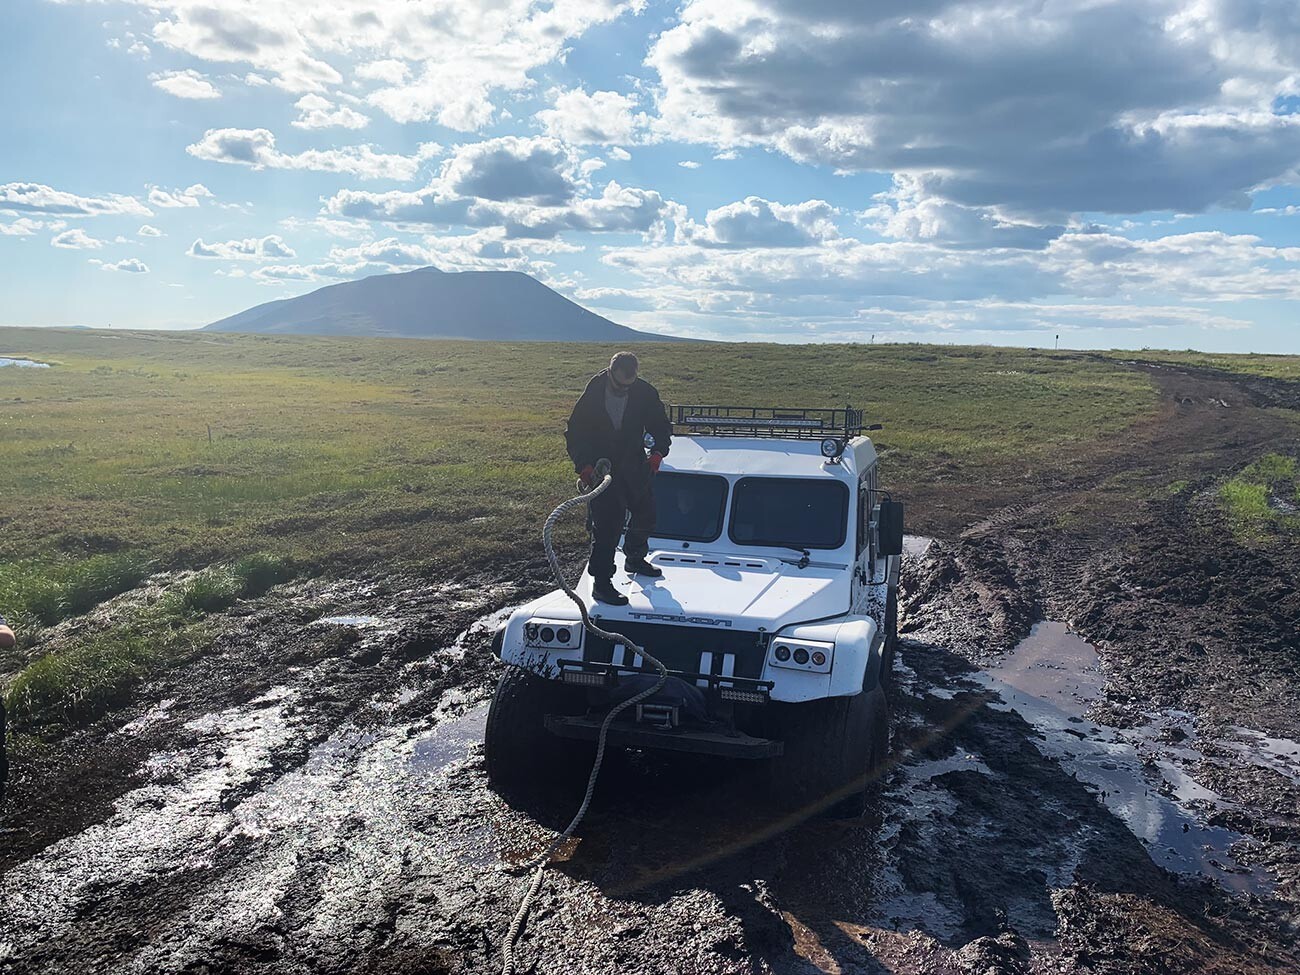 A trip to sopkas outside Anadyr in August. Yes, this ATV stuck in the mud.